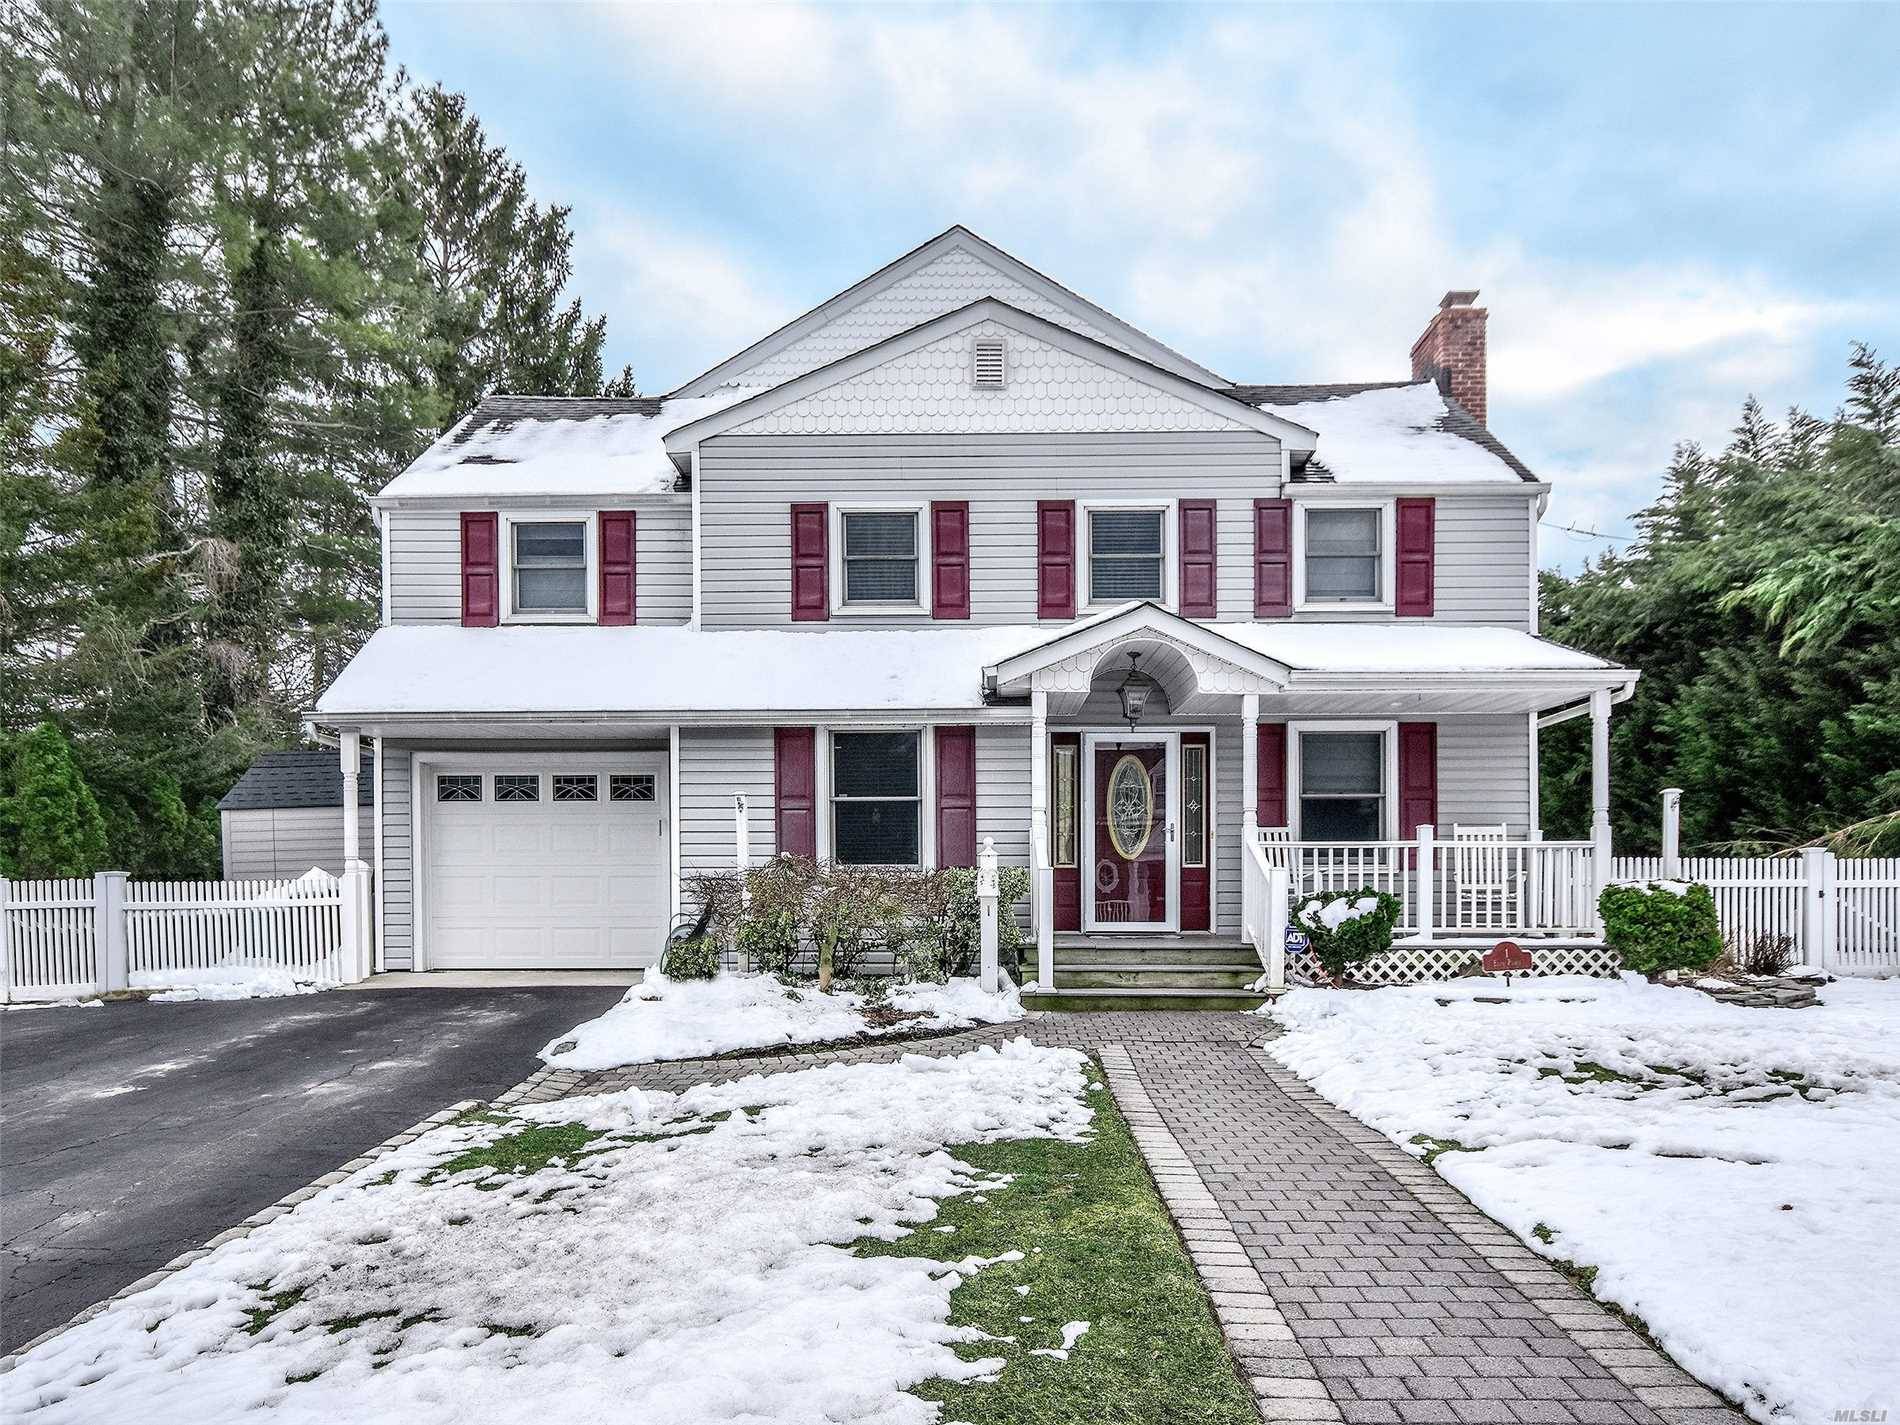 Picture Perfect Impeccably Maintained 4 Bedroom, 2 Full & 2 Half Bath Colonial With All The Modern Amenities Today's Buyers Are Looking For.